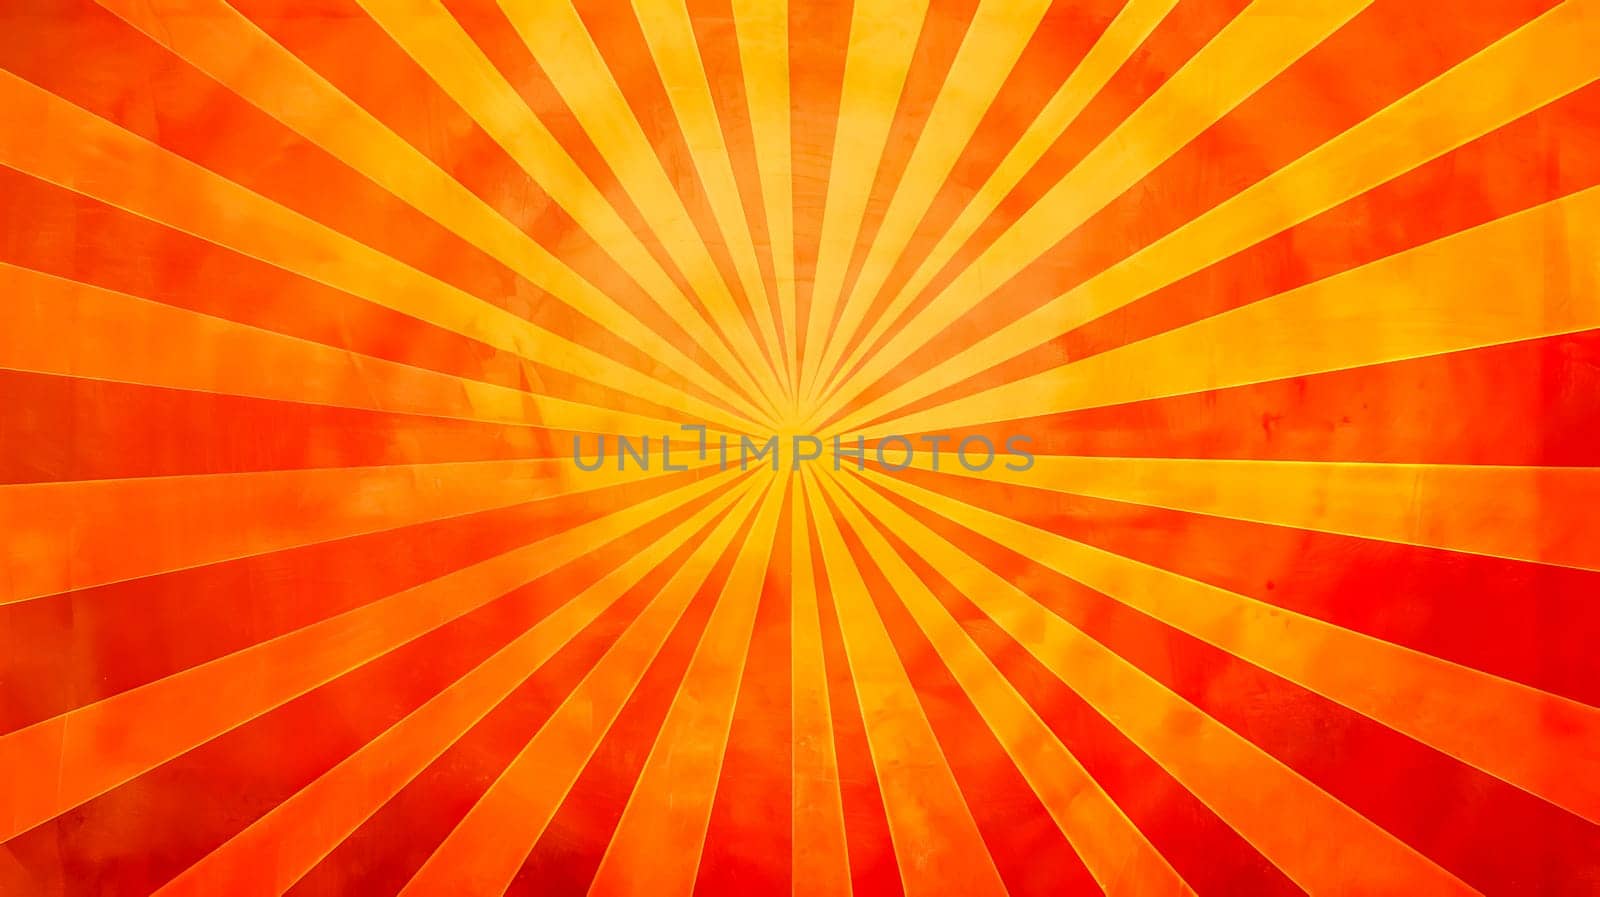 Vivid abstract background with a dynamic orange and yellow radial gradient pattern